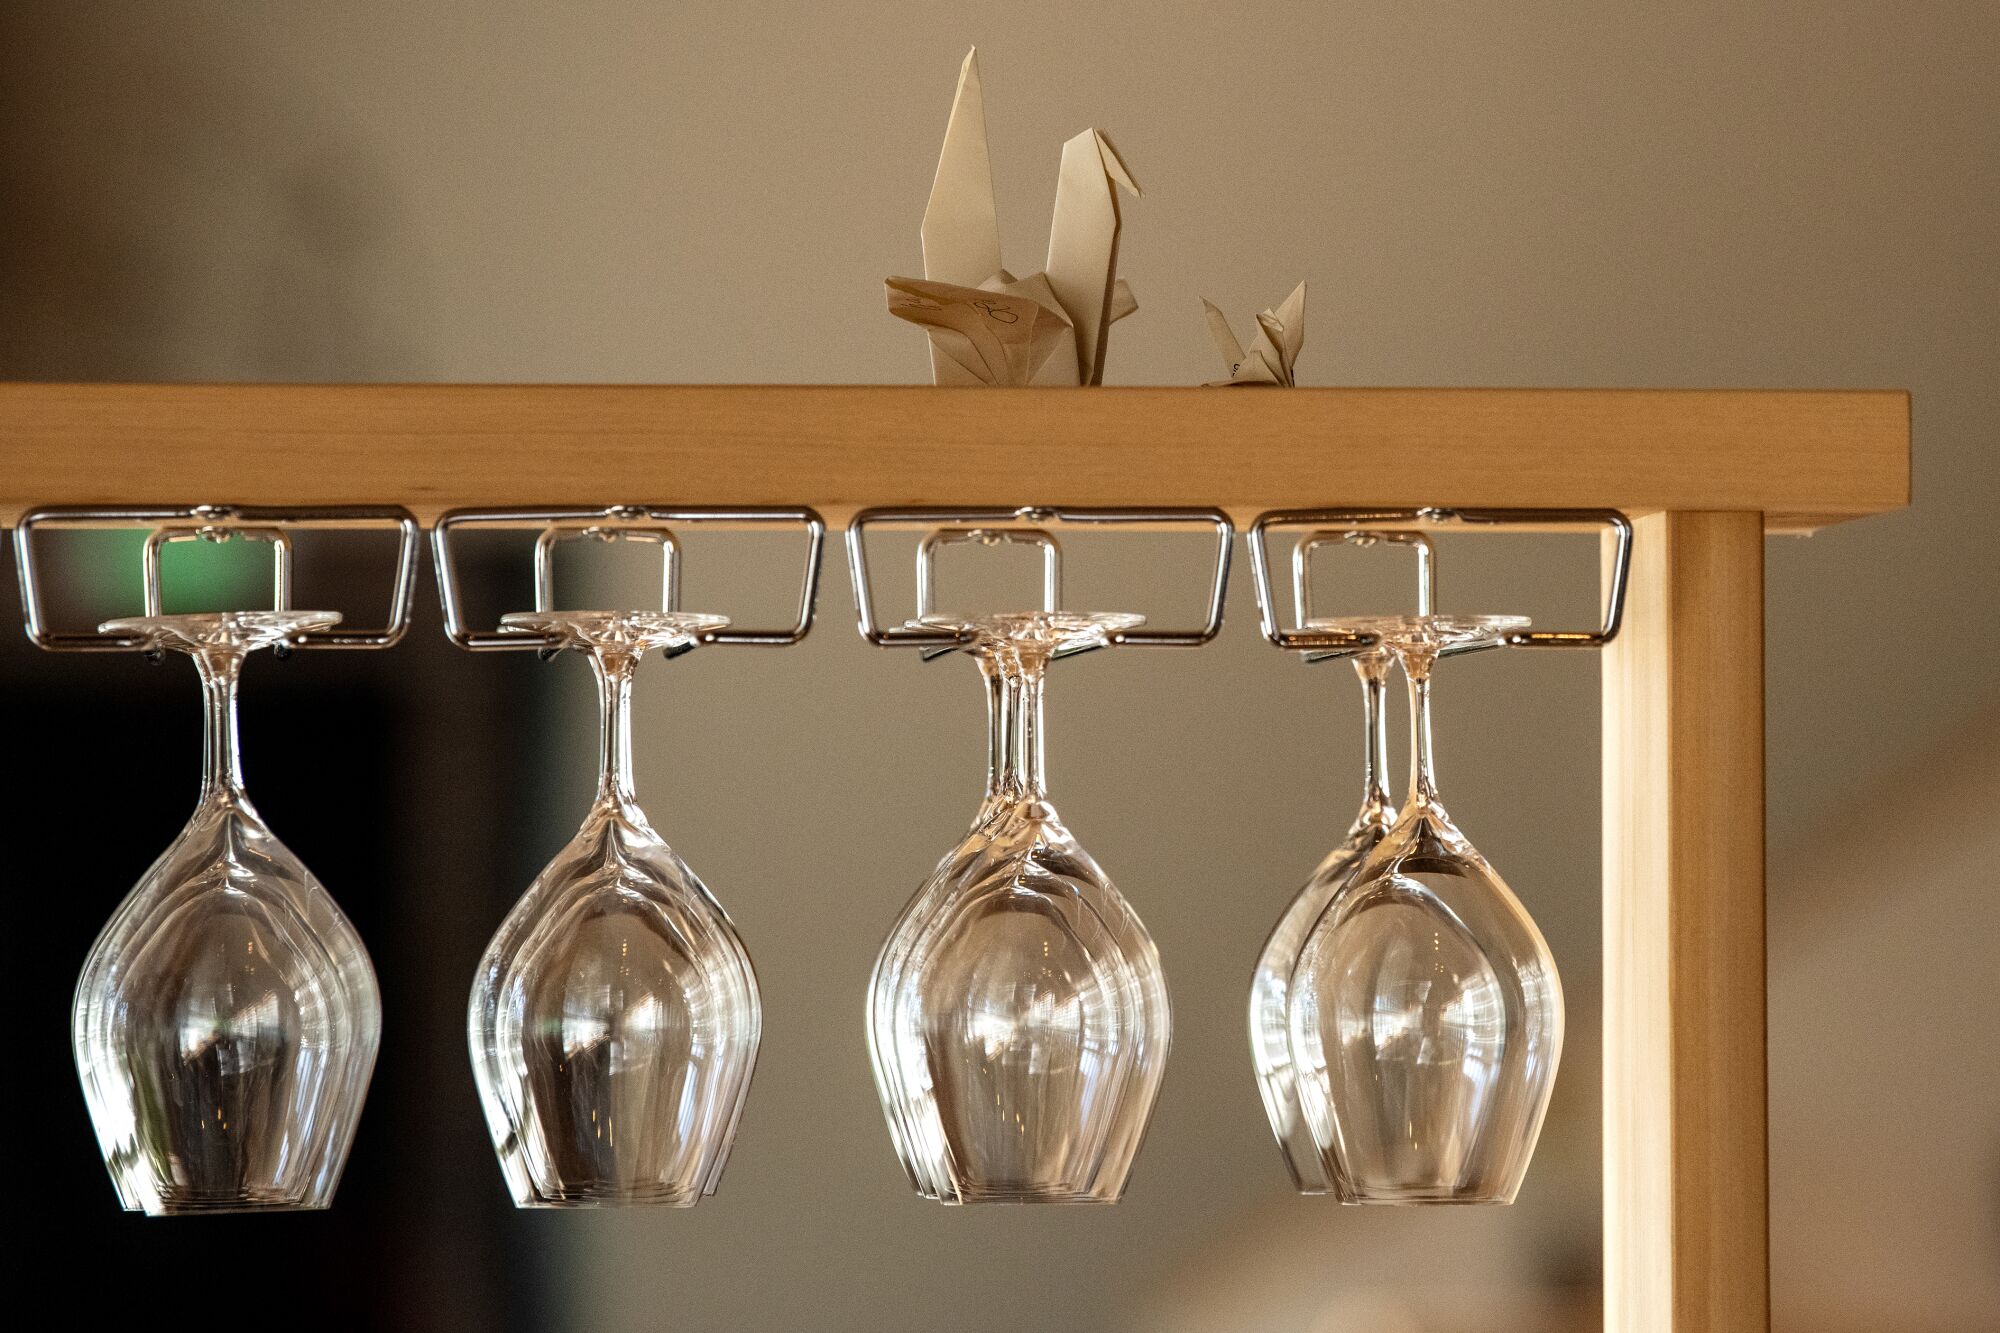 A pair of paper origami cranes atop a wooden shelf with wine glasses hanging from it.